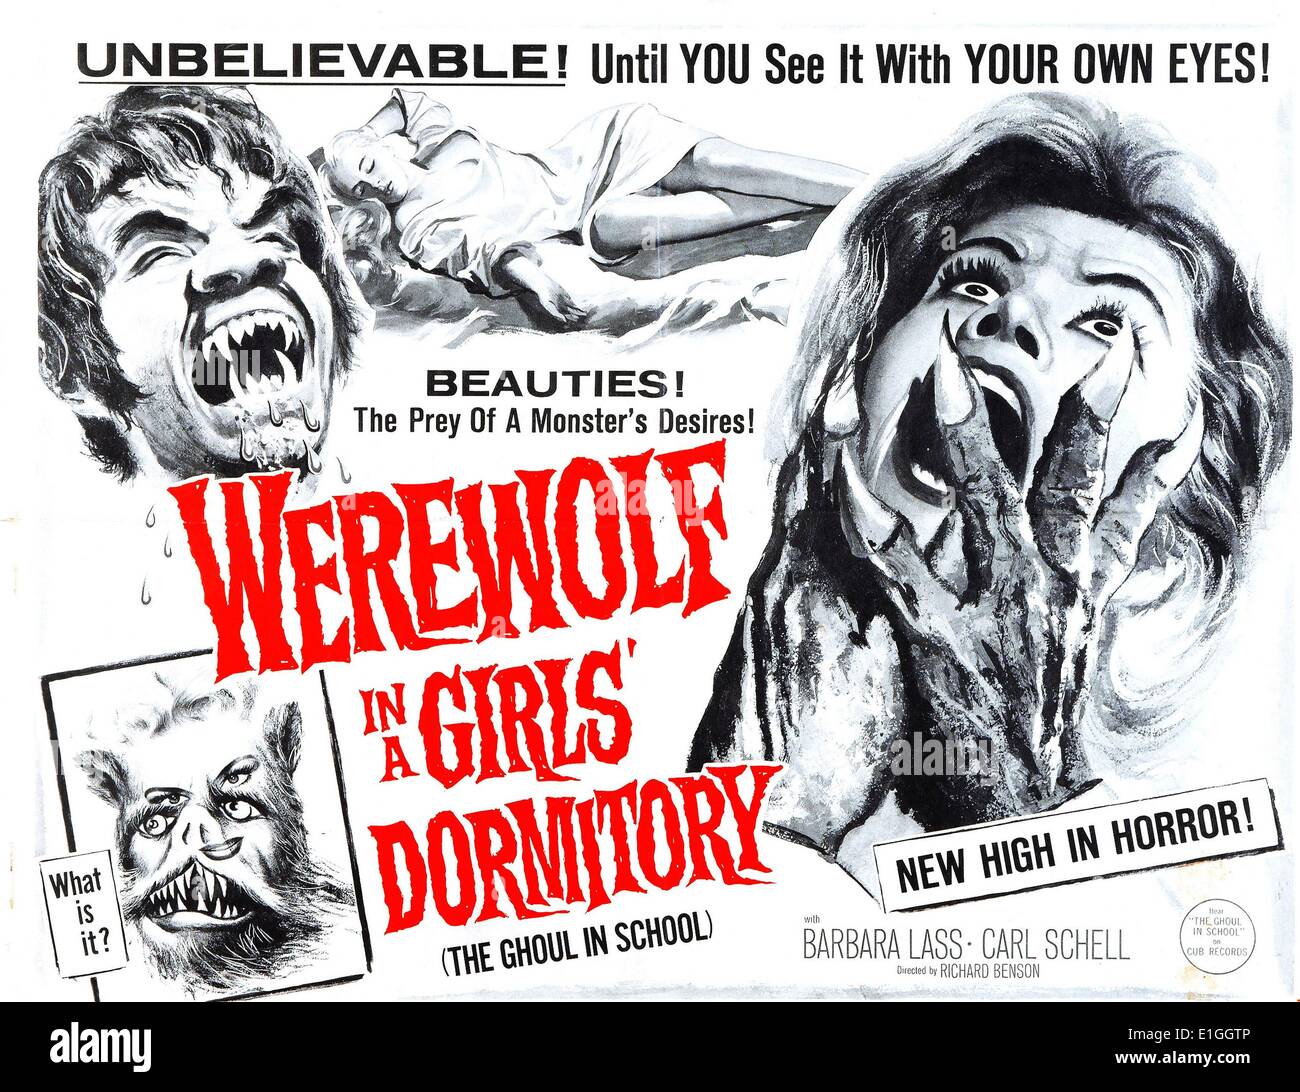 Werewolf in a Girls' Dormitory with Barbara Lass and Carl Schell was an action/horror film released in 1961. Stock Photo